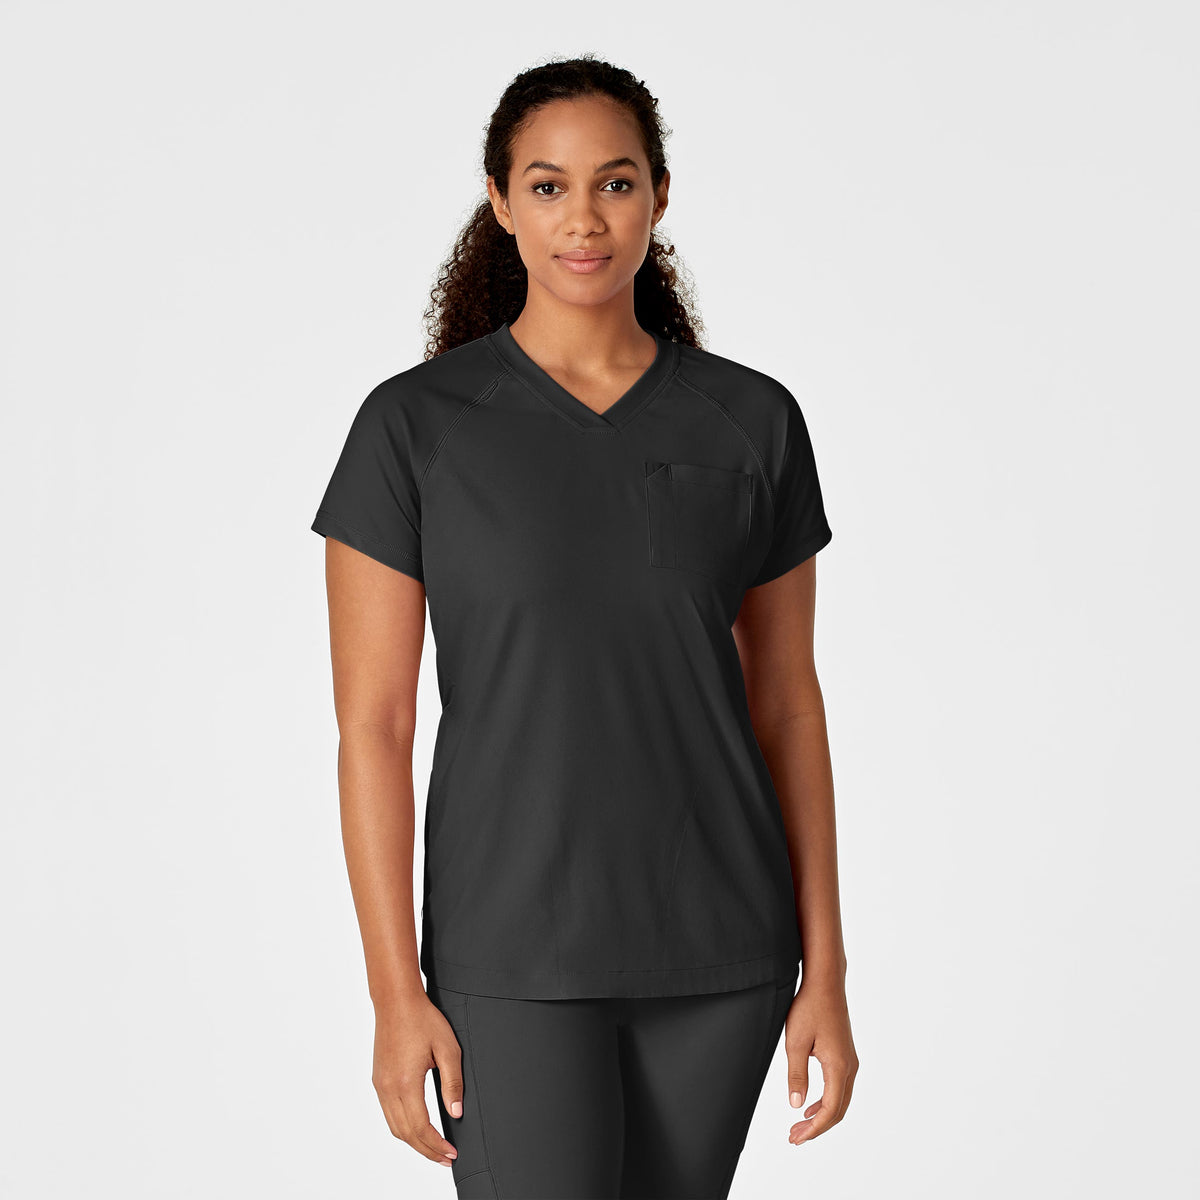 Black scrubs for women • Compare & see prices now »